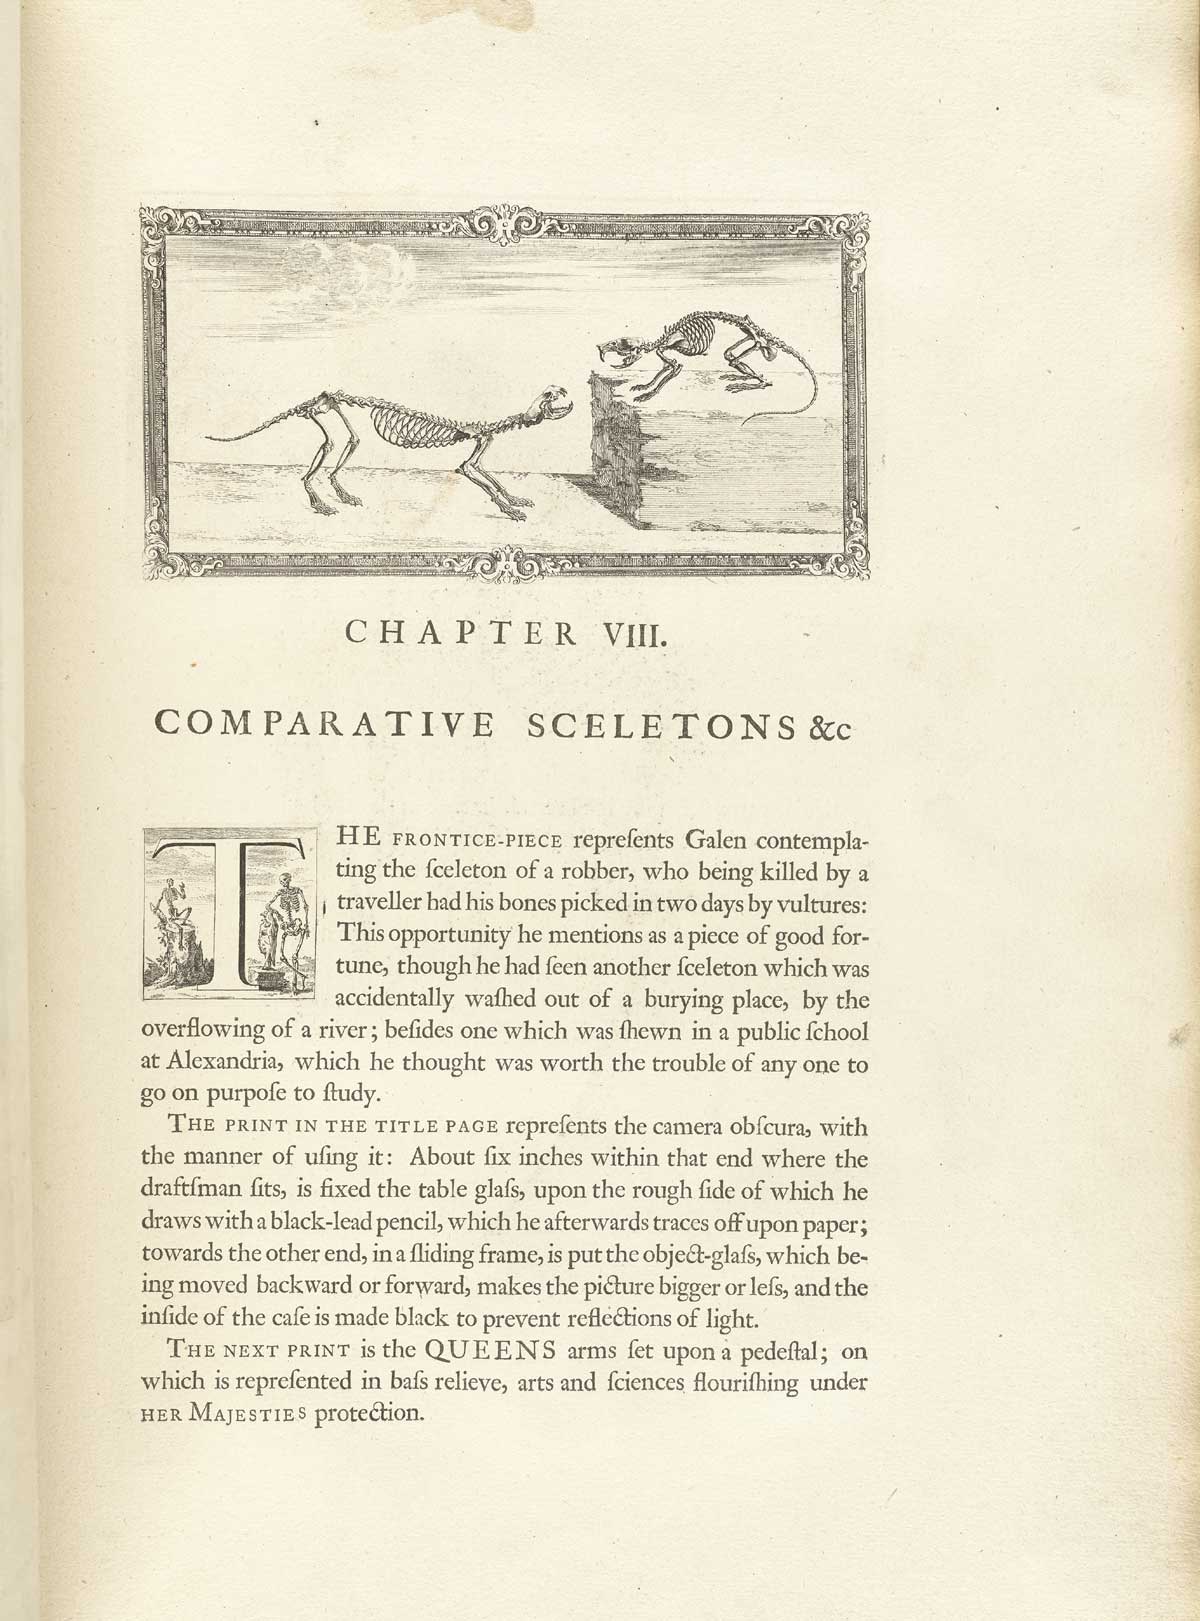 Typeset page of text with large engraved vignette at the top of the page showing the skeletons of a weasel and a rat facing each other and hissing, with the weasel on the left on the ground and the rat on the right on a large wodden plank, from William Cheselden’s Osteographia, NLM Call no.: WZ 260 C499o 1733.